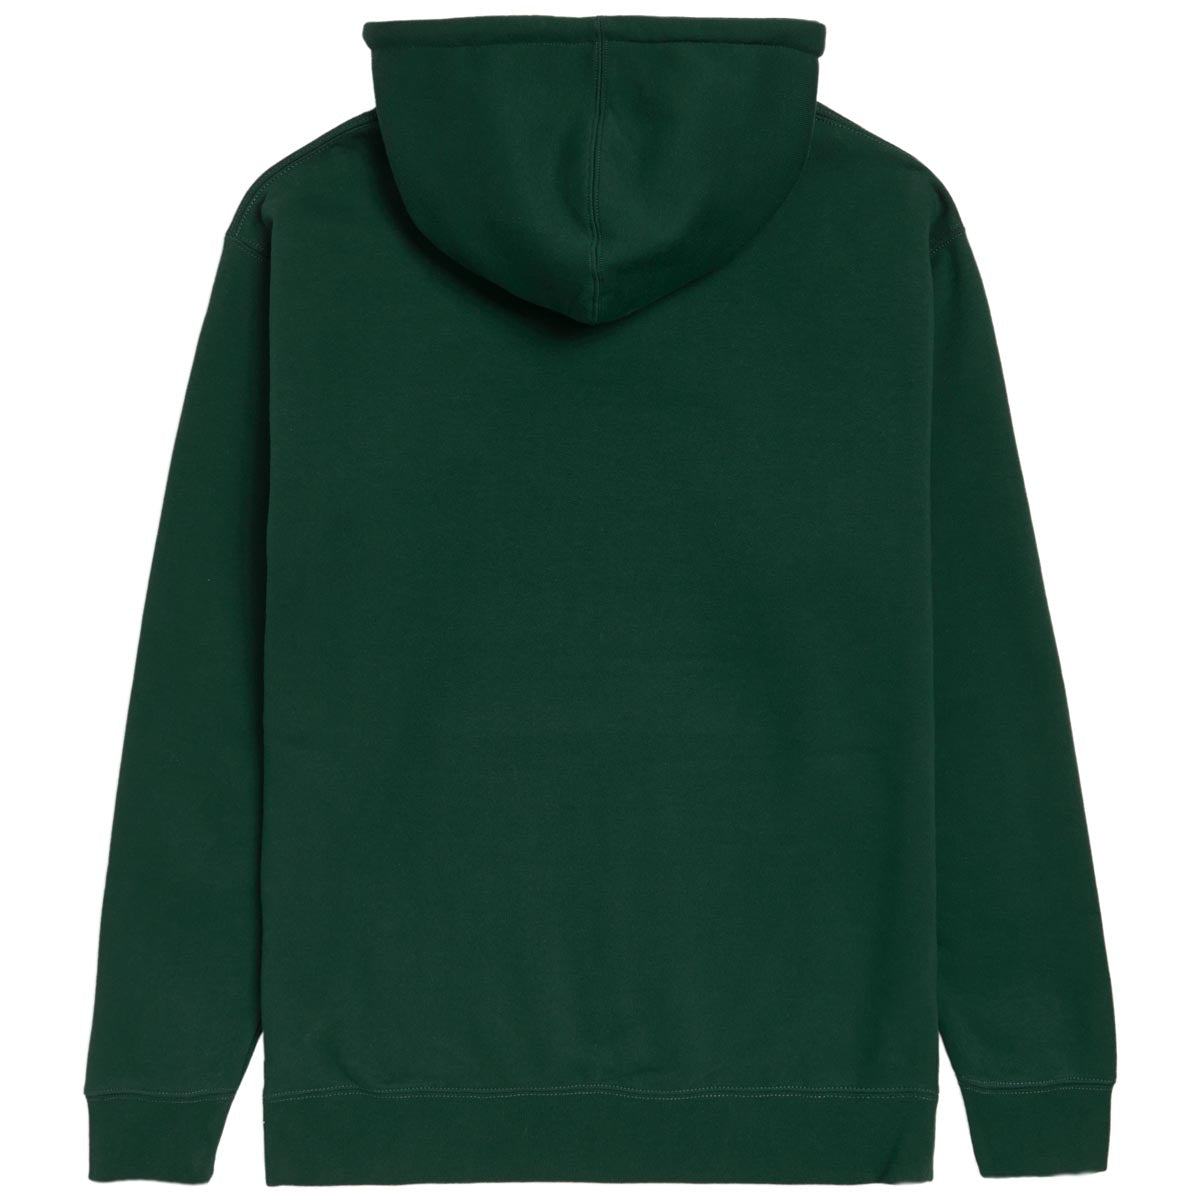 CCS Staple Pullover Hoodie - Green image 4